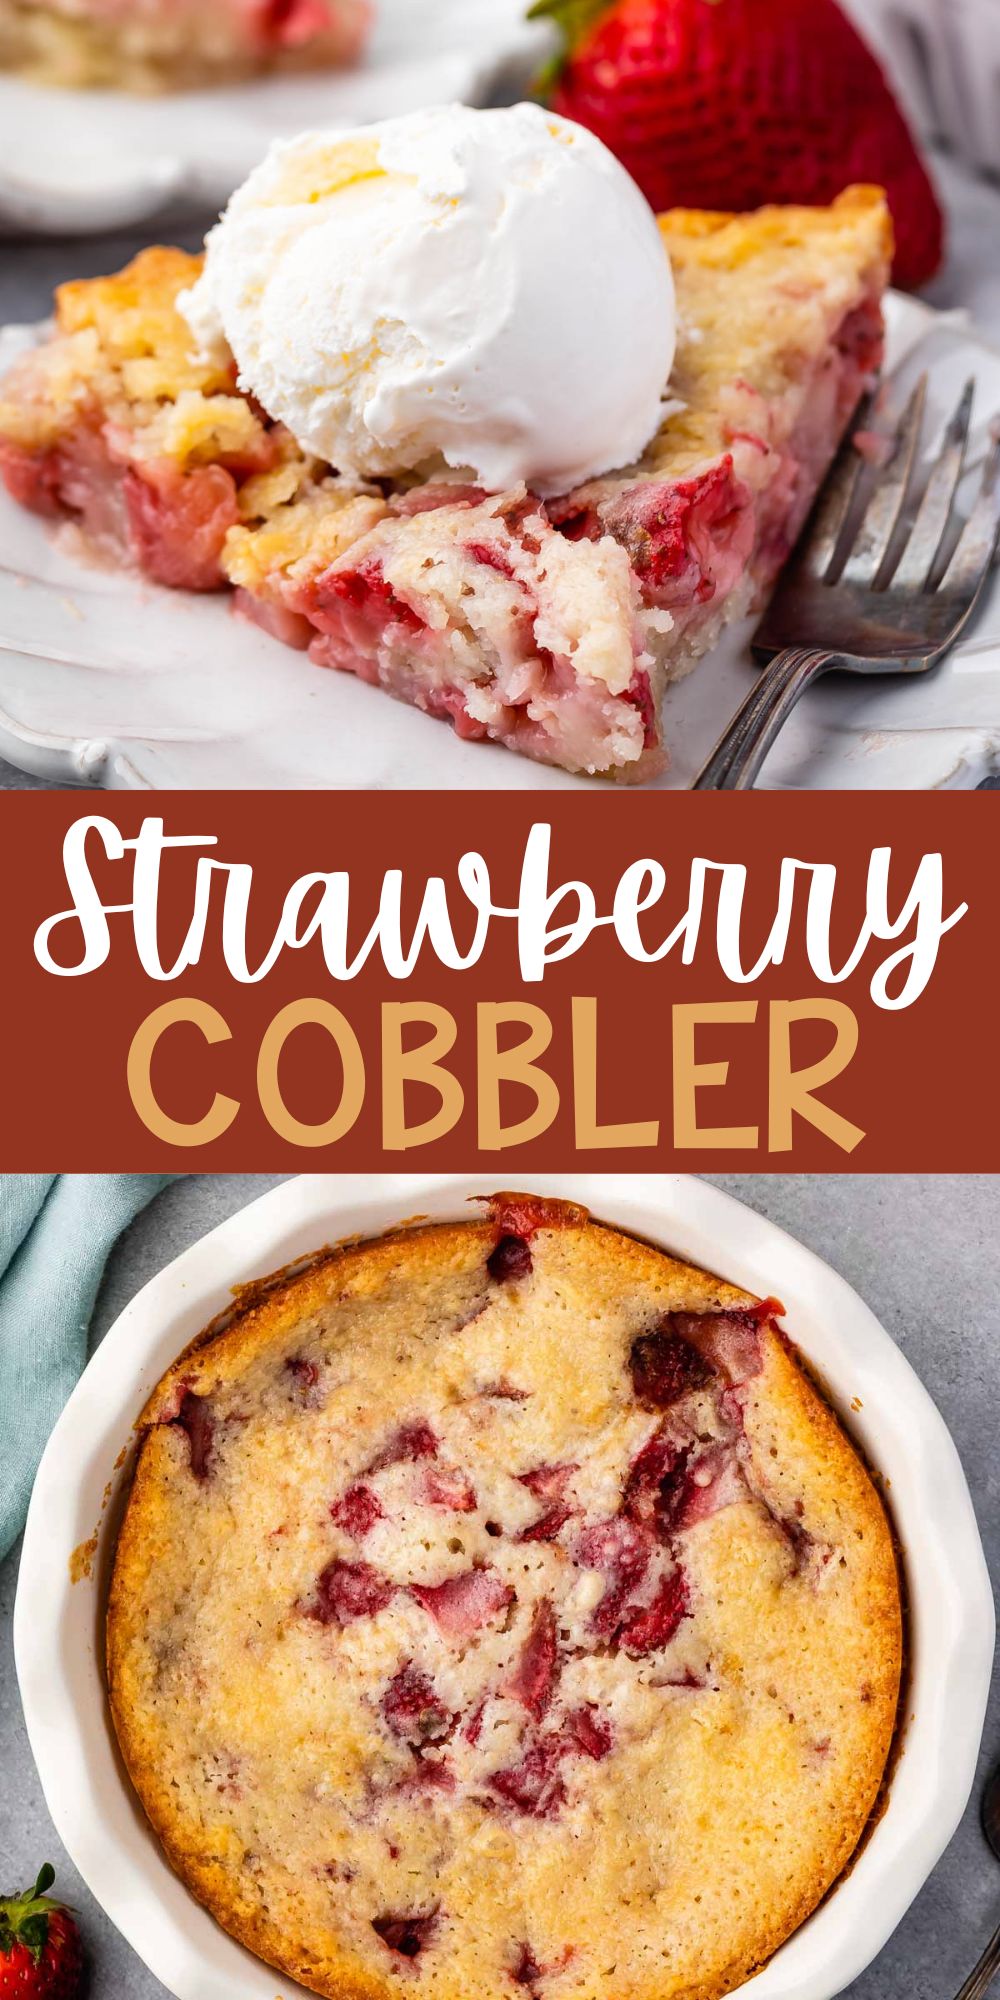 two photos of strawberry cobbler on a grey plate with ice cream on top with words on the image.